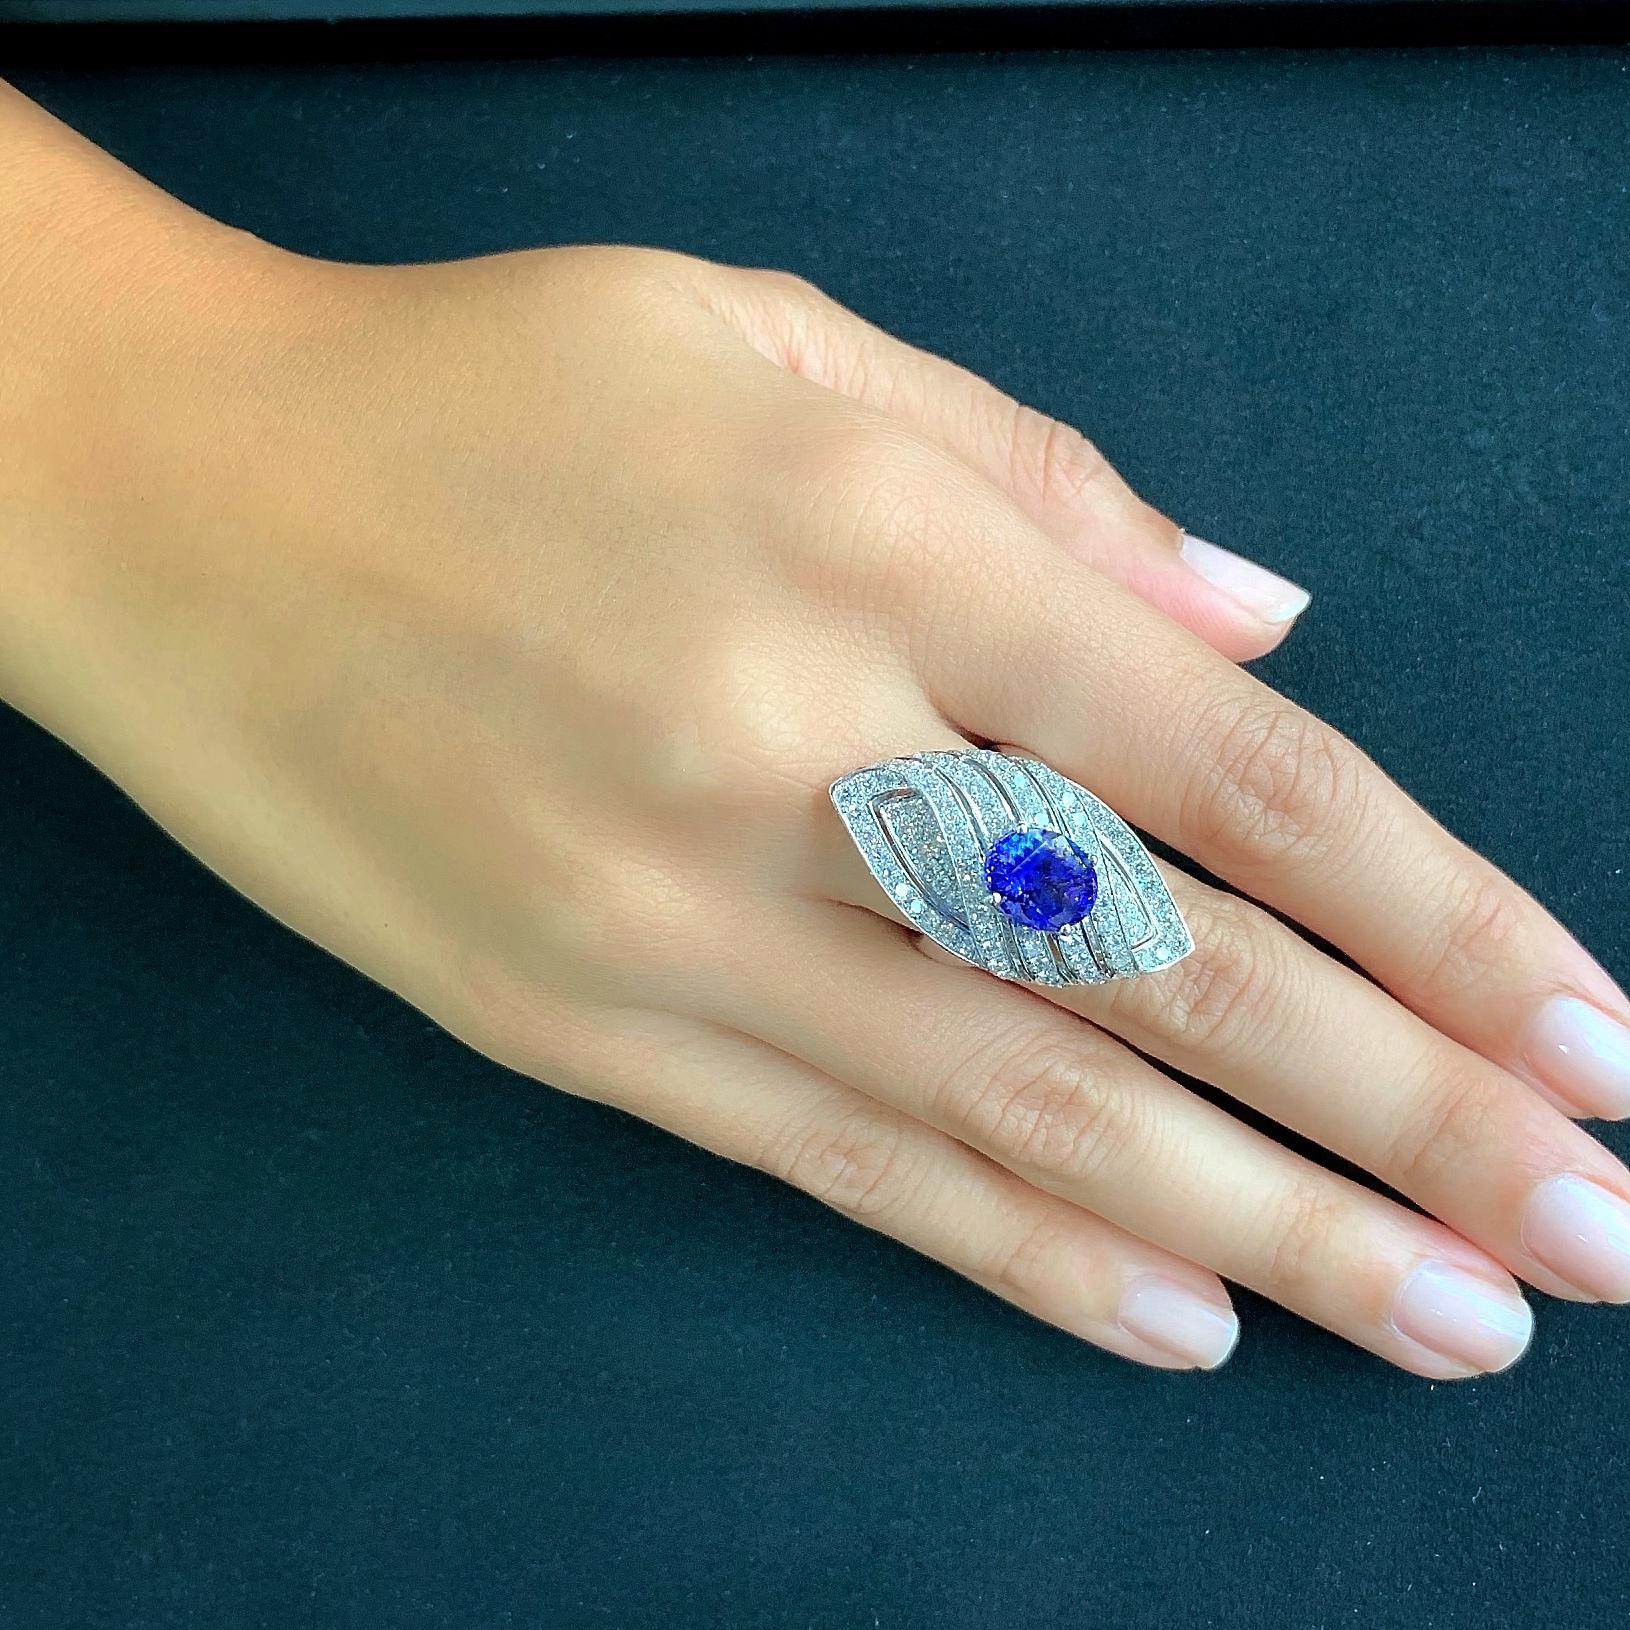 Butani's 18-karat white gold ring is encrusted with 2.08 carats of shimmering white diamonds and centered with a 3.62 carat oval-cut blue tanzanite in a classic marquise setting.  Currently a ring size US 7.  For other sizes, please contact